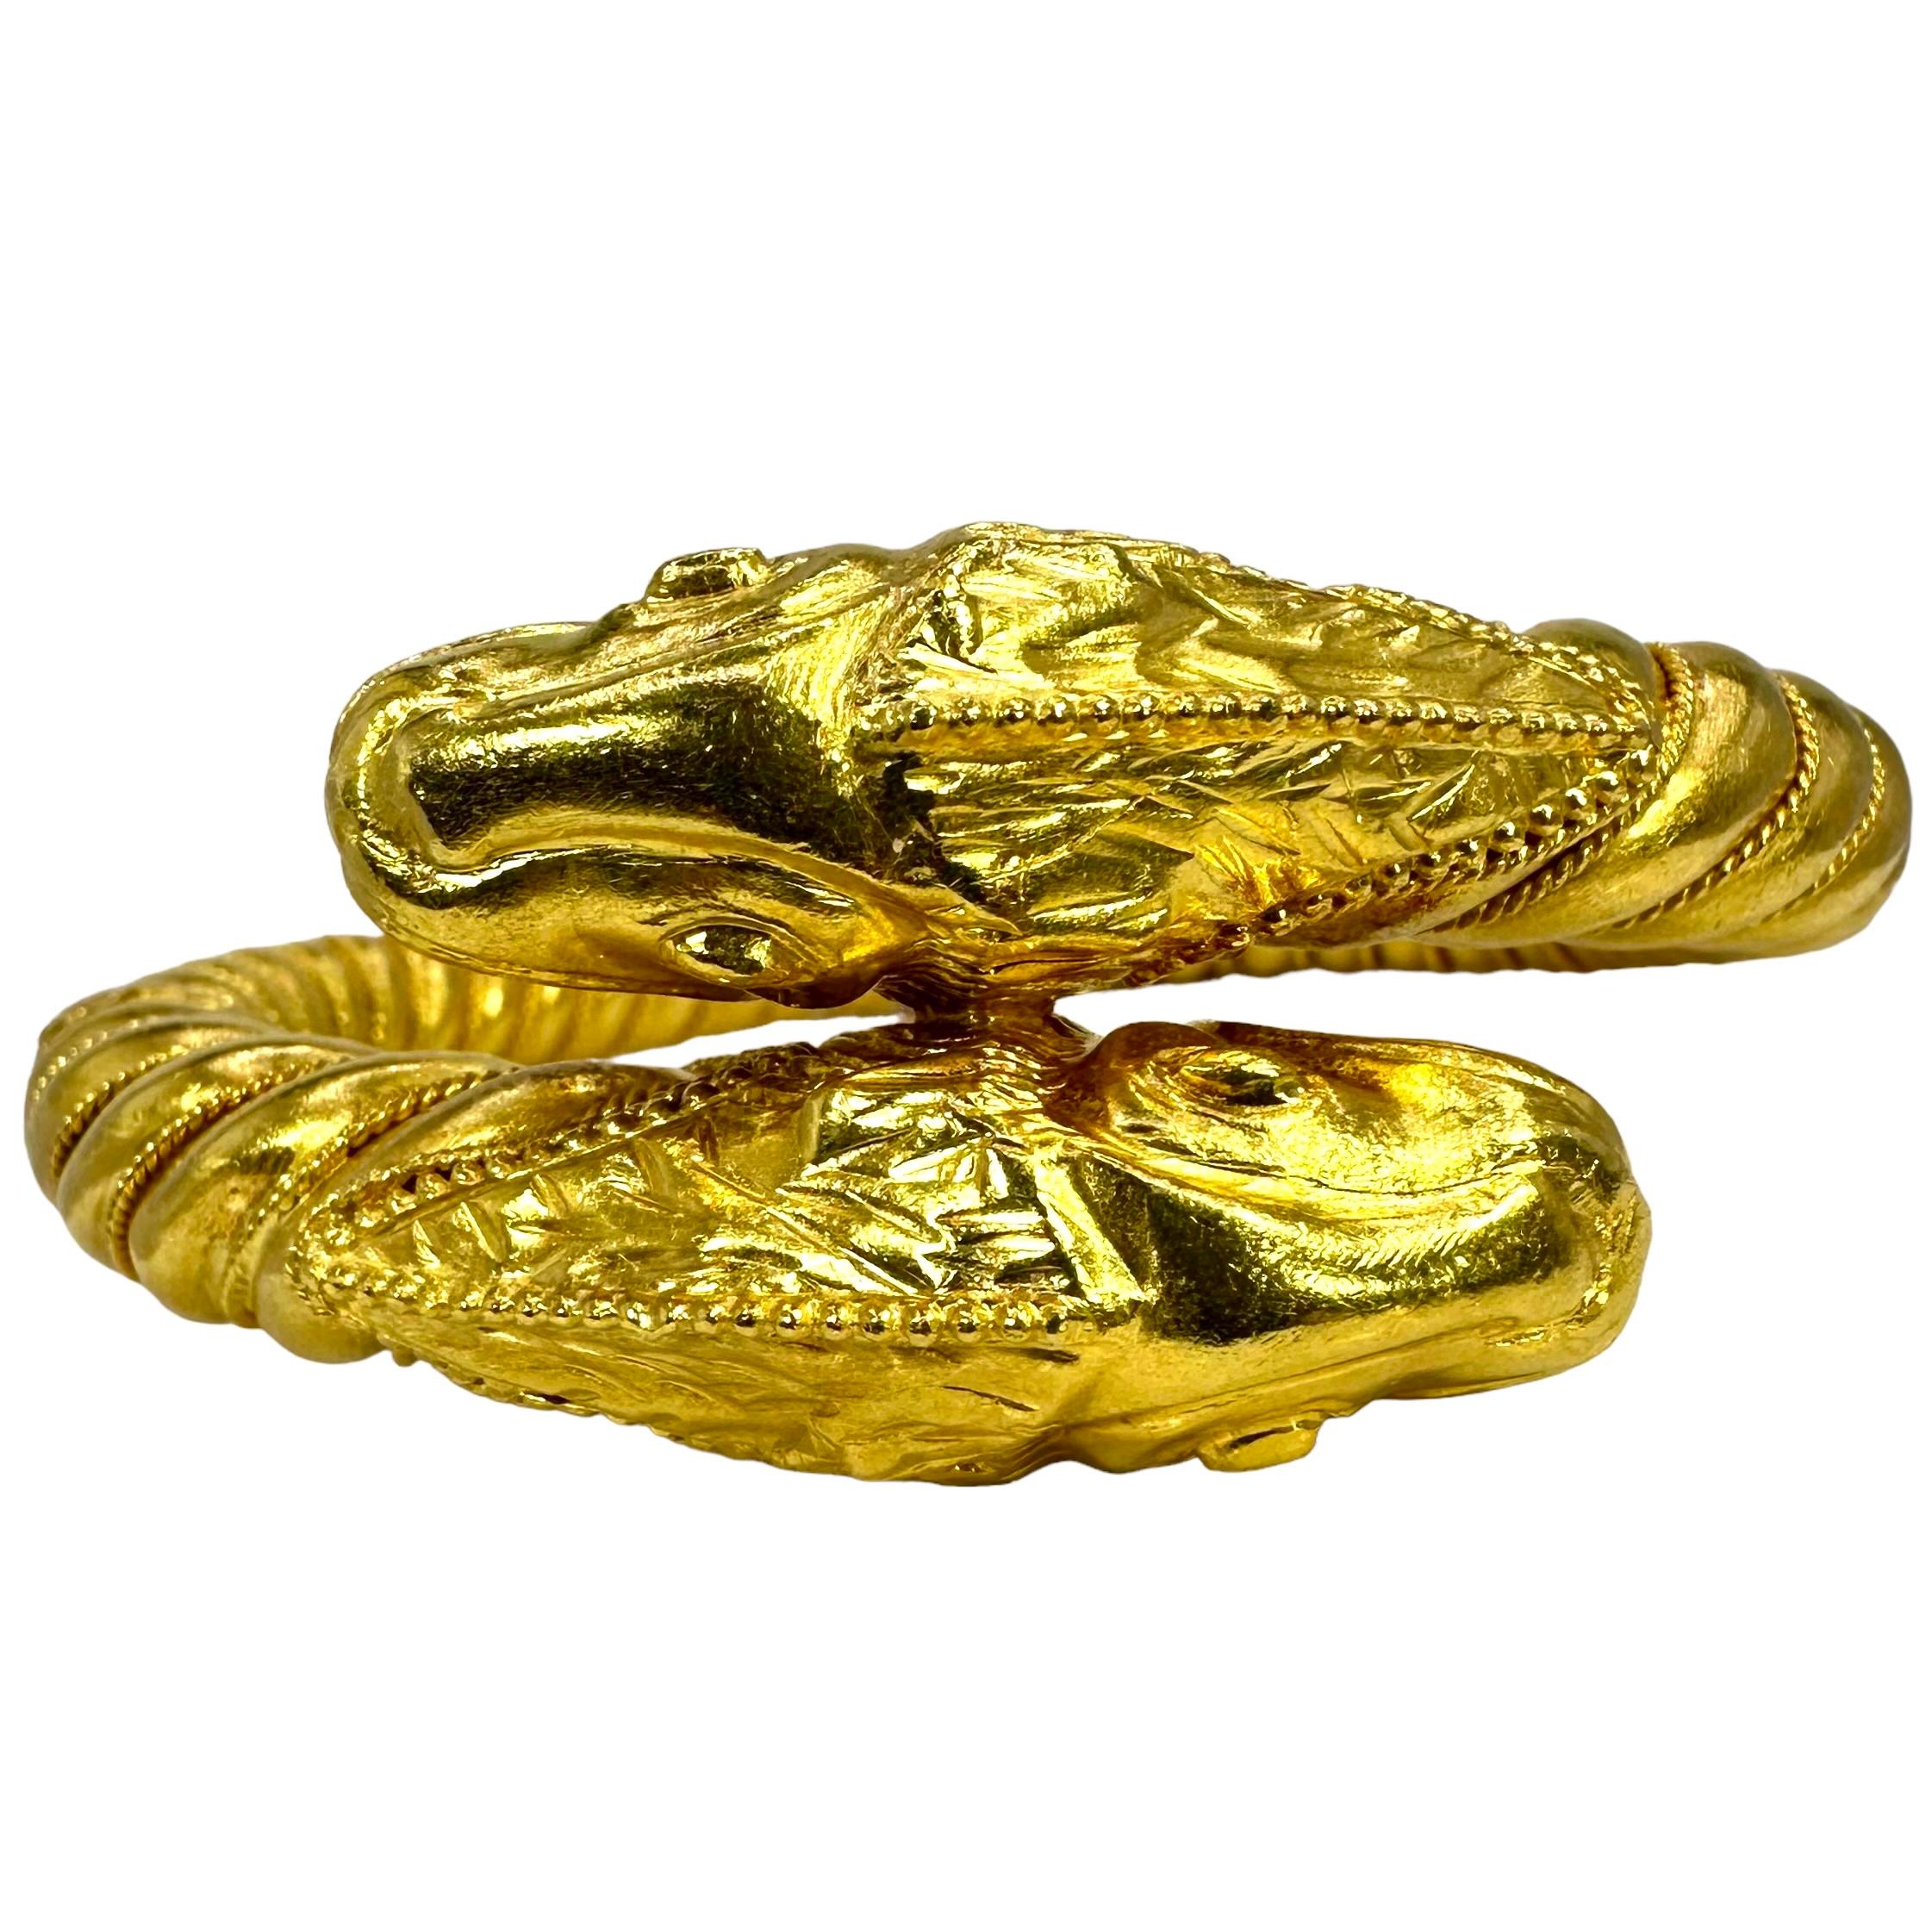 Crafted in 22K yellow gold by Greek designer Ilias Lalaounis, this handsome two headed mythical creature bypass bracelet stands apart from the others. Two oversized heads, facing opposite directions, taper down artistically to connect with the rope